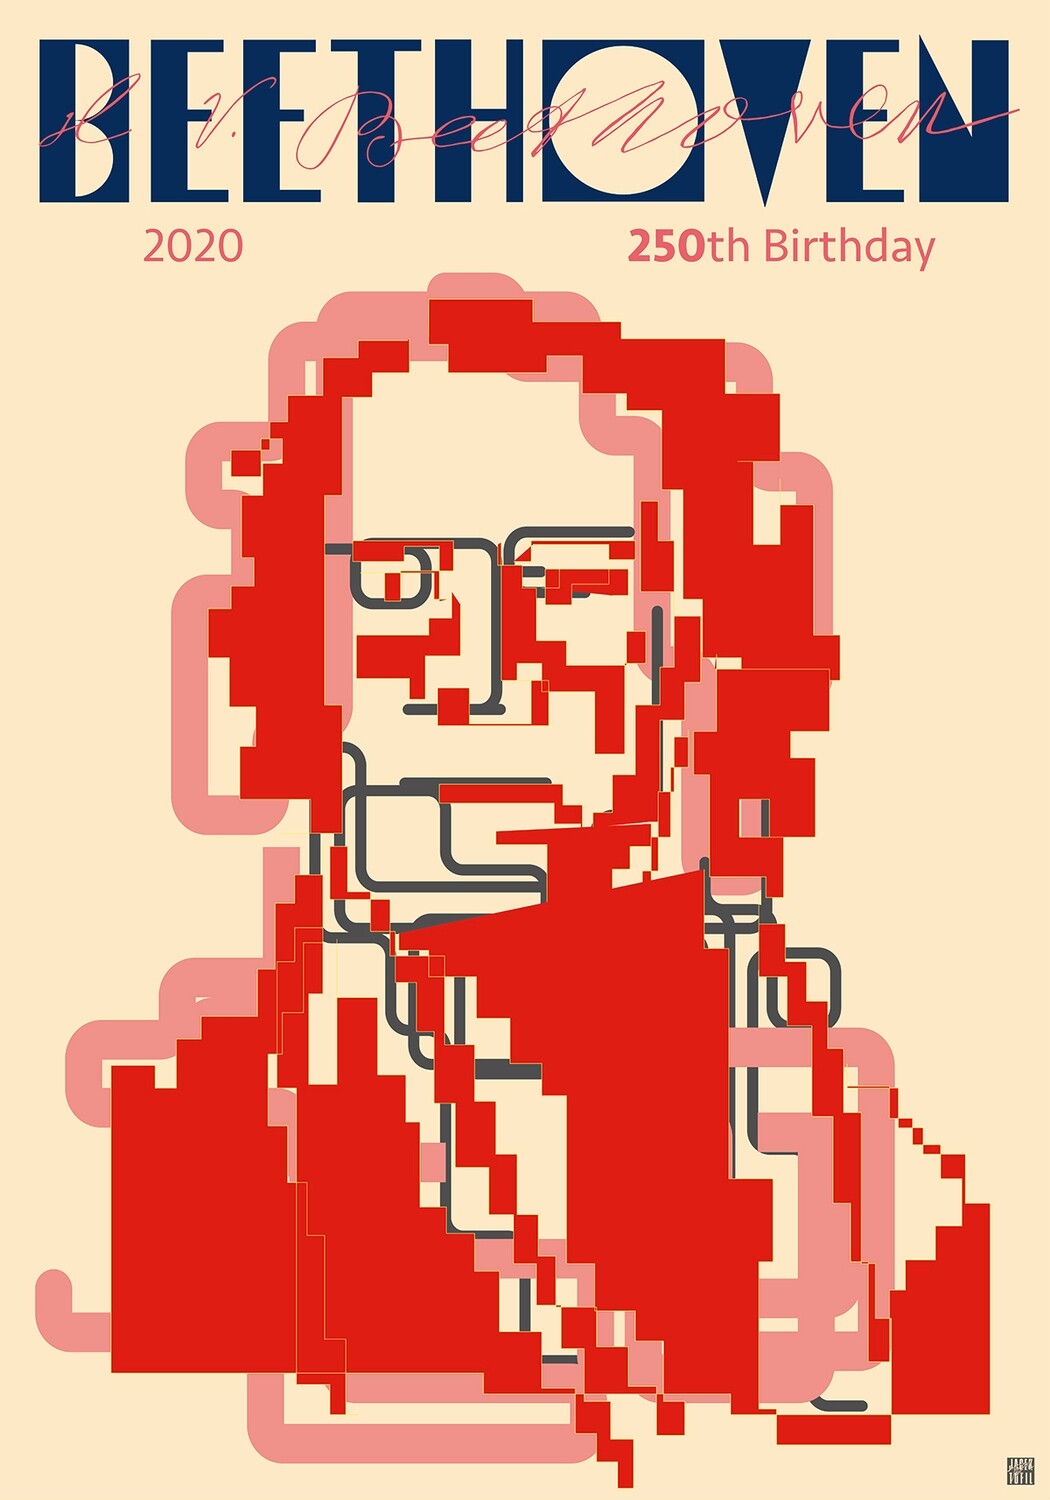 Ludwig Van Beethoven, 1770–1827, 250th Anniversary of Beethoven’s birth, poster 1